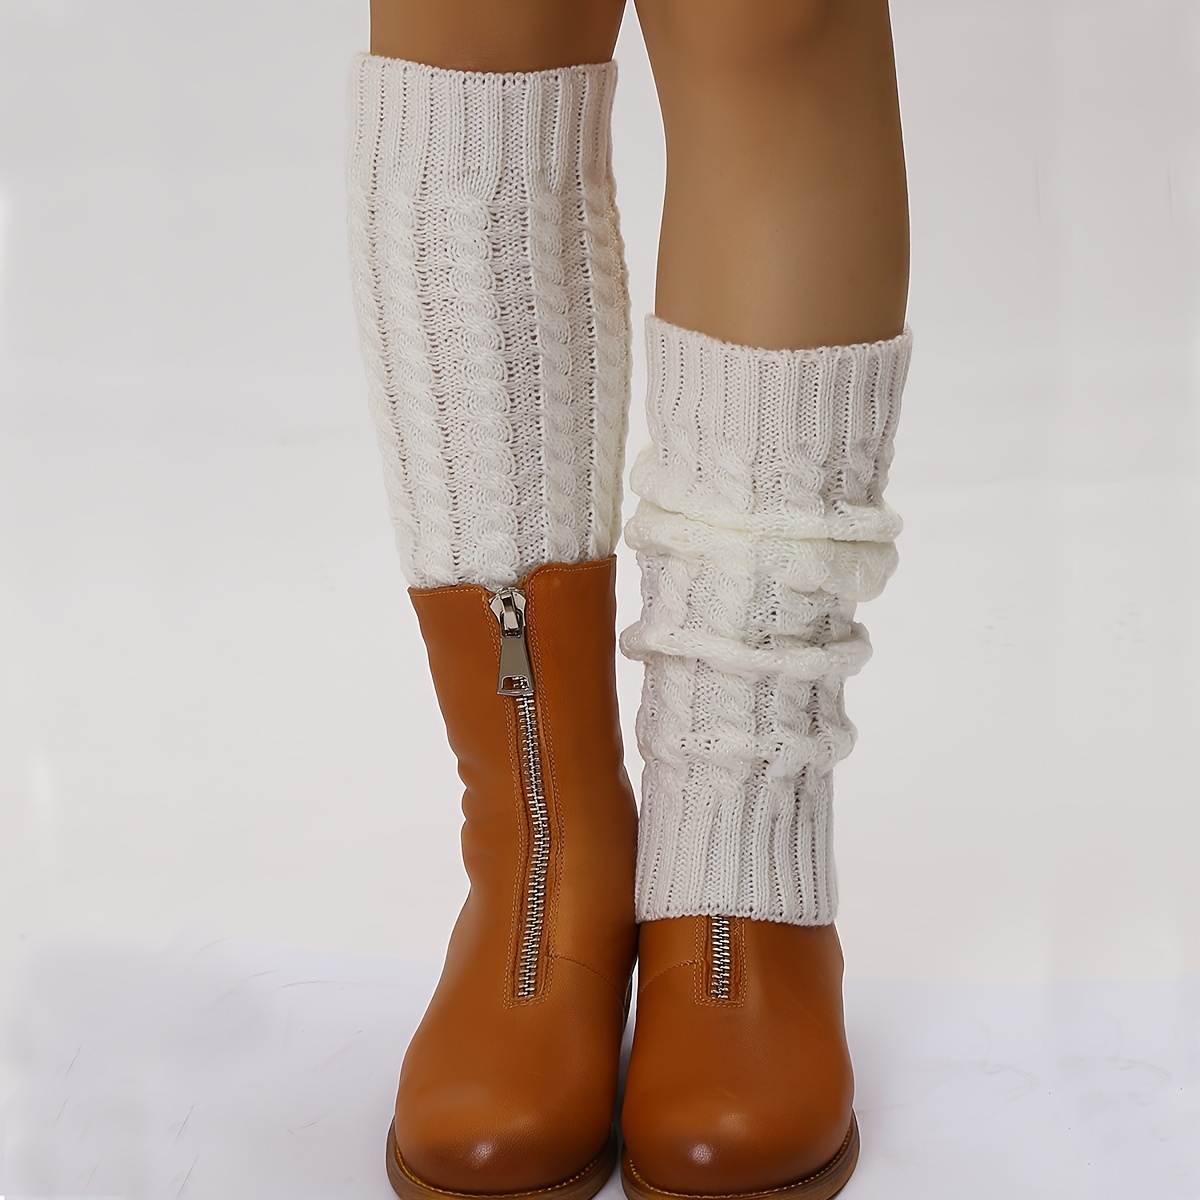 Will And Sandy Knit Braid Anklet Handmade Leg Warmers With Button Charm  Short Boot Cuffs For Women And Girls Autumn/Winter Loose Stockings In White  And Black From Harrypotter_jewelry, $2.7